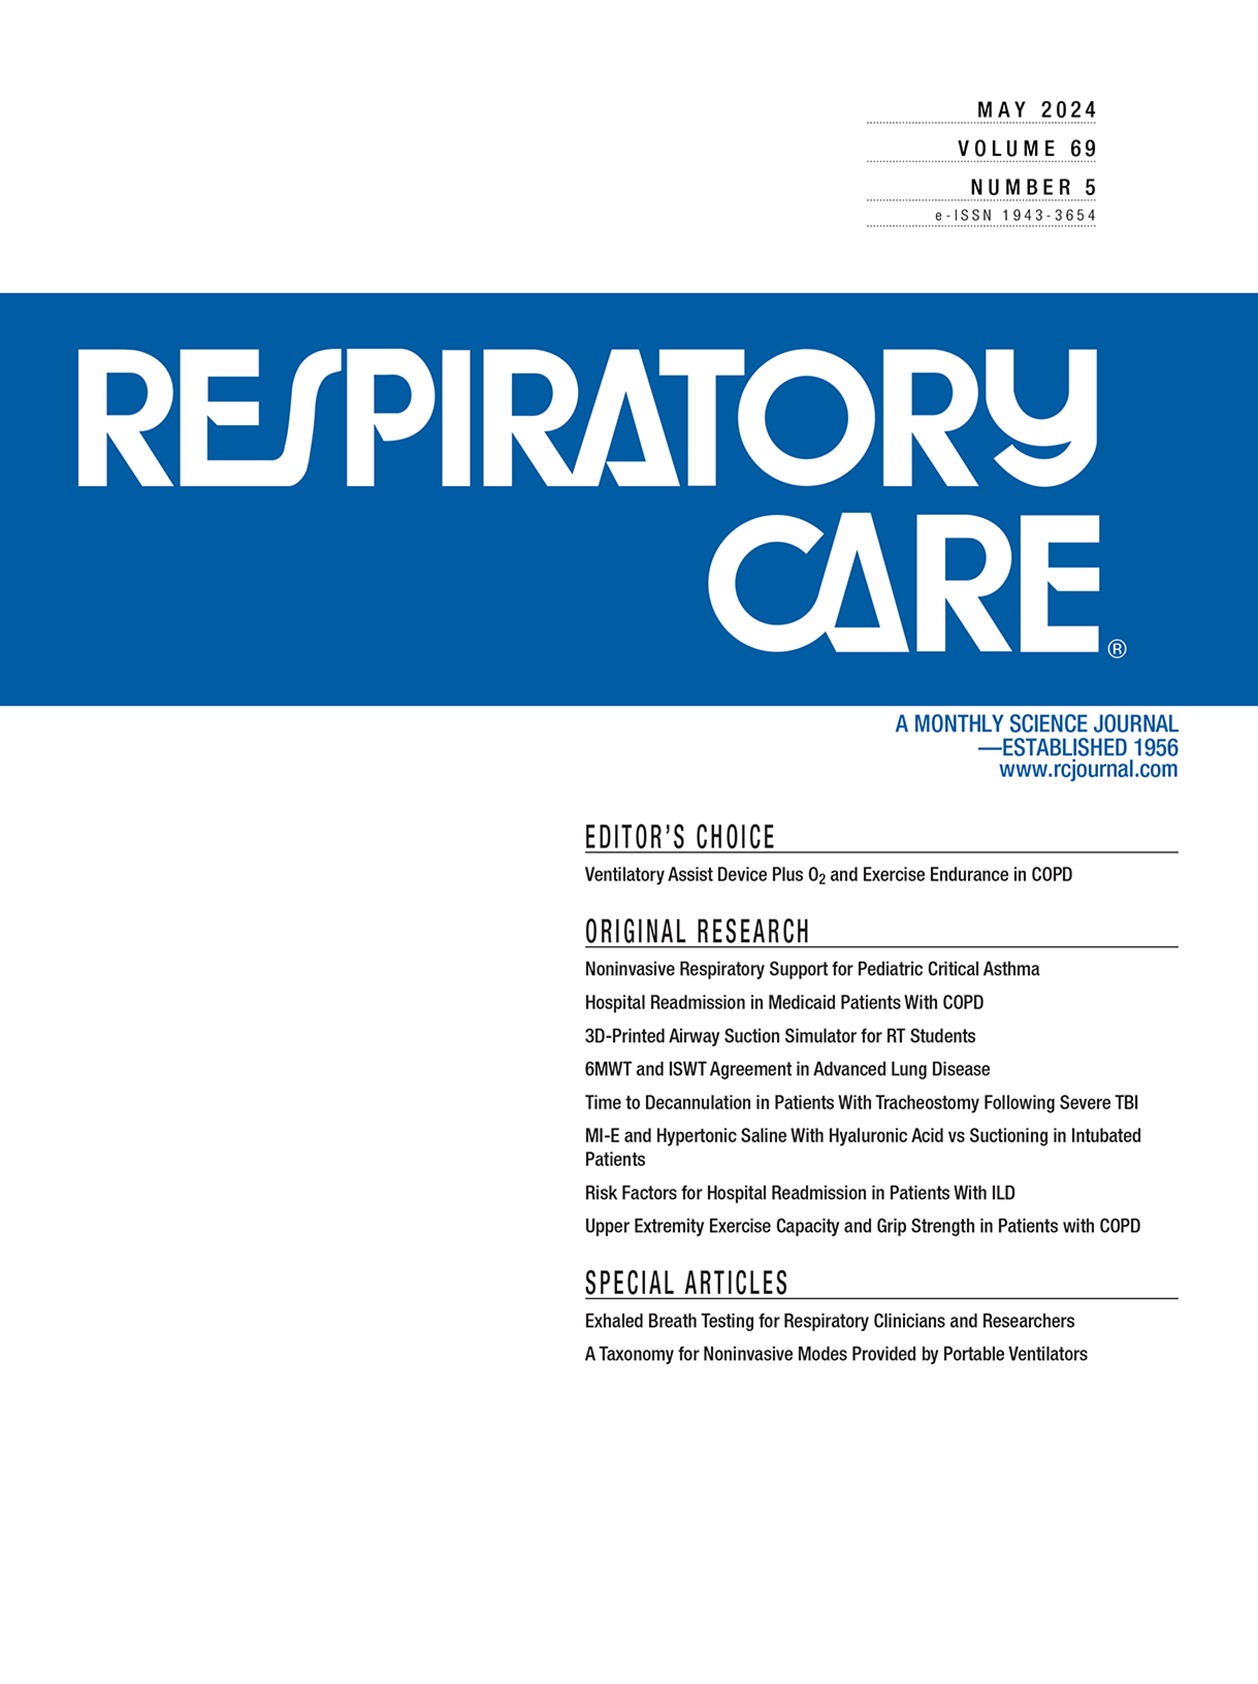 Noninvasive Respiratory Support in Pediatric Critical Asthma: What to Start and Where to Go?